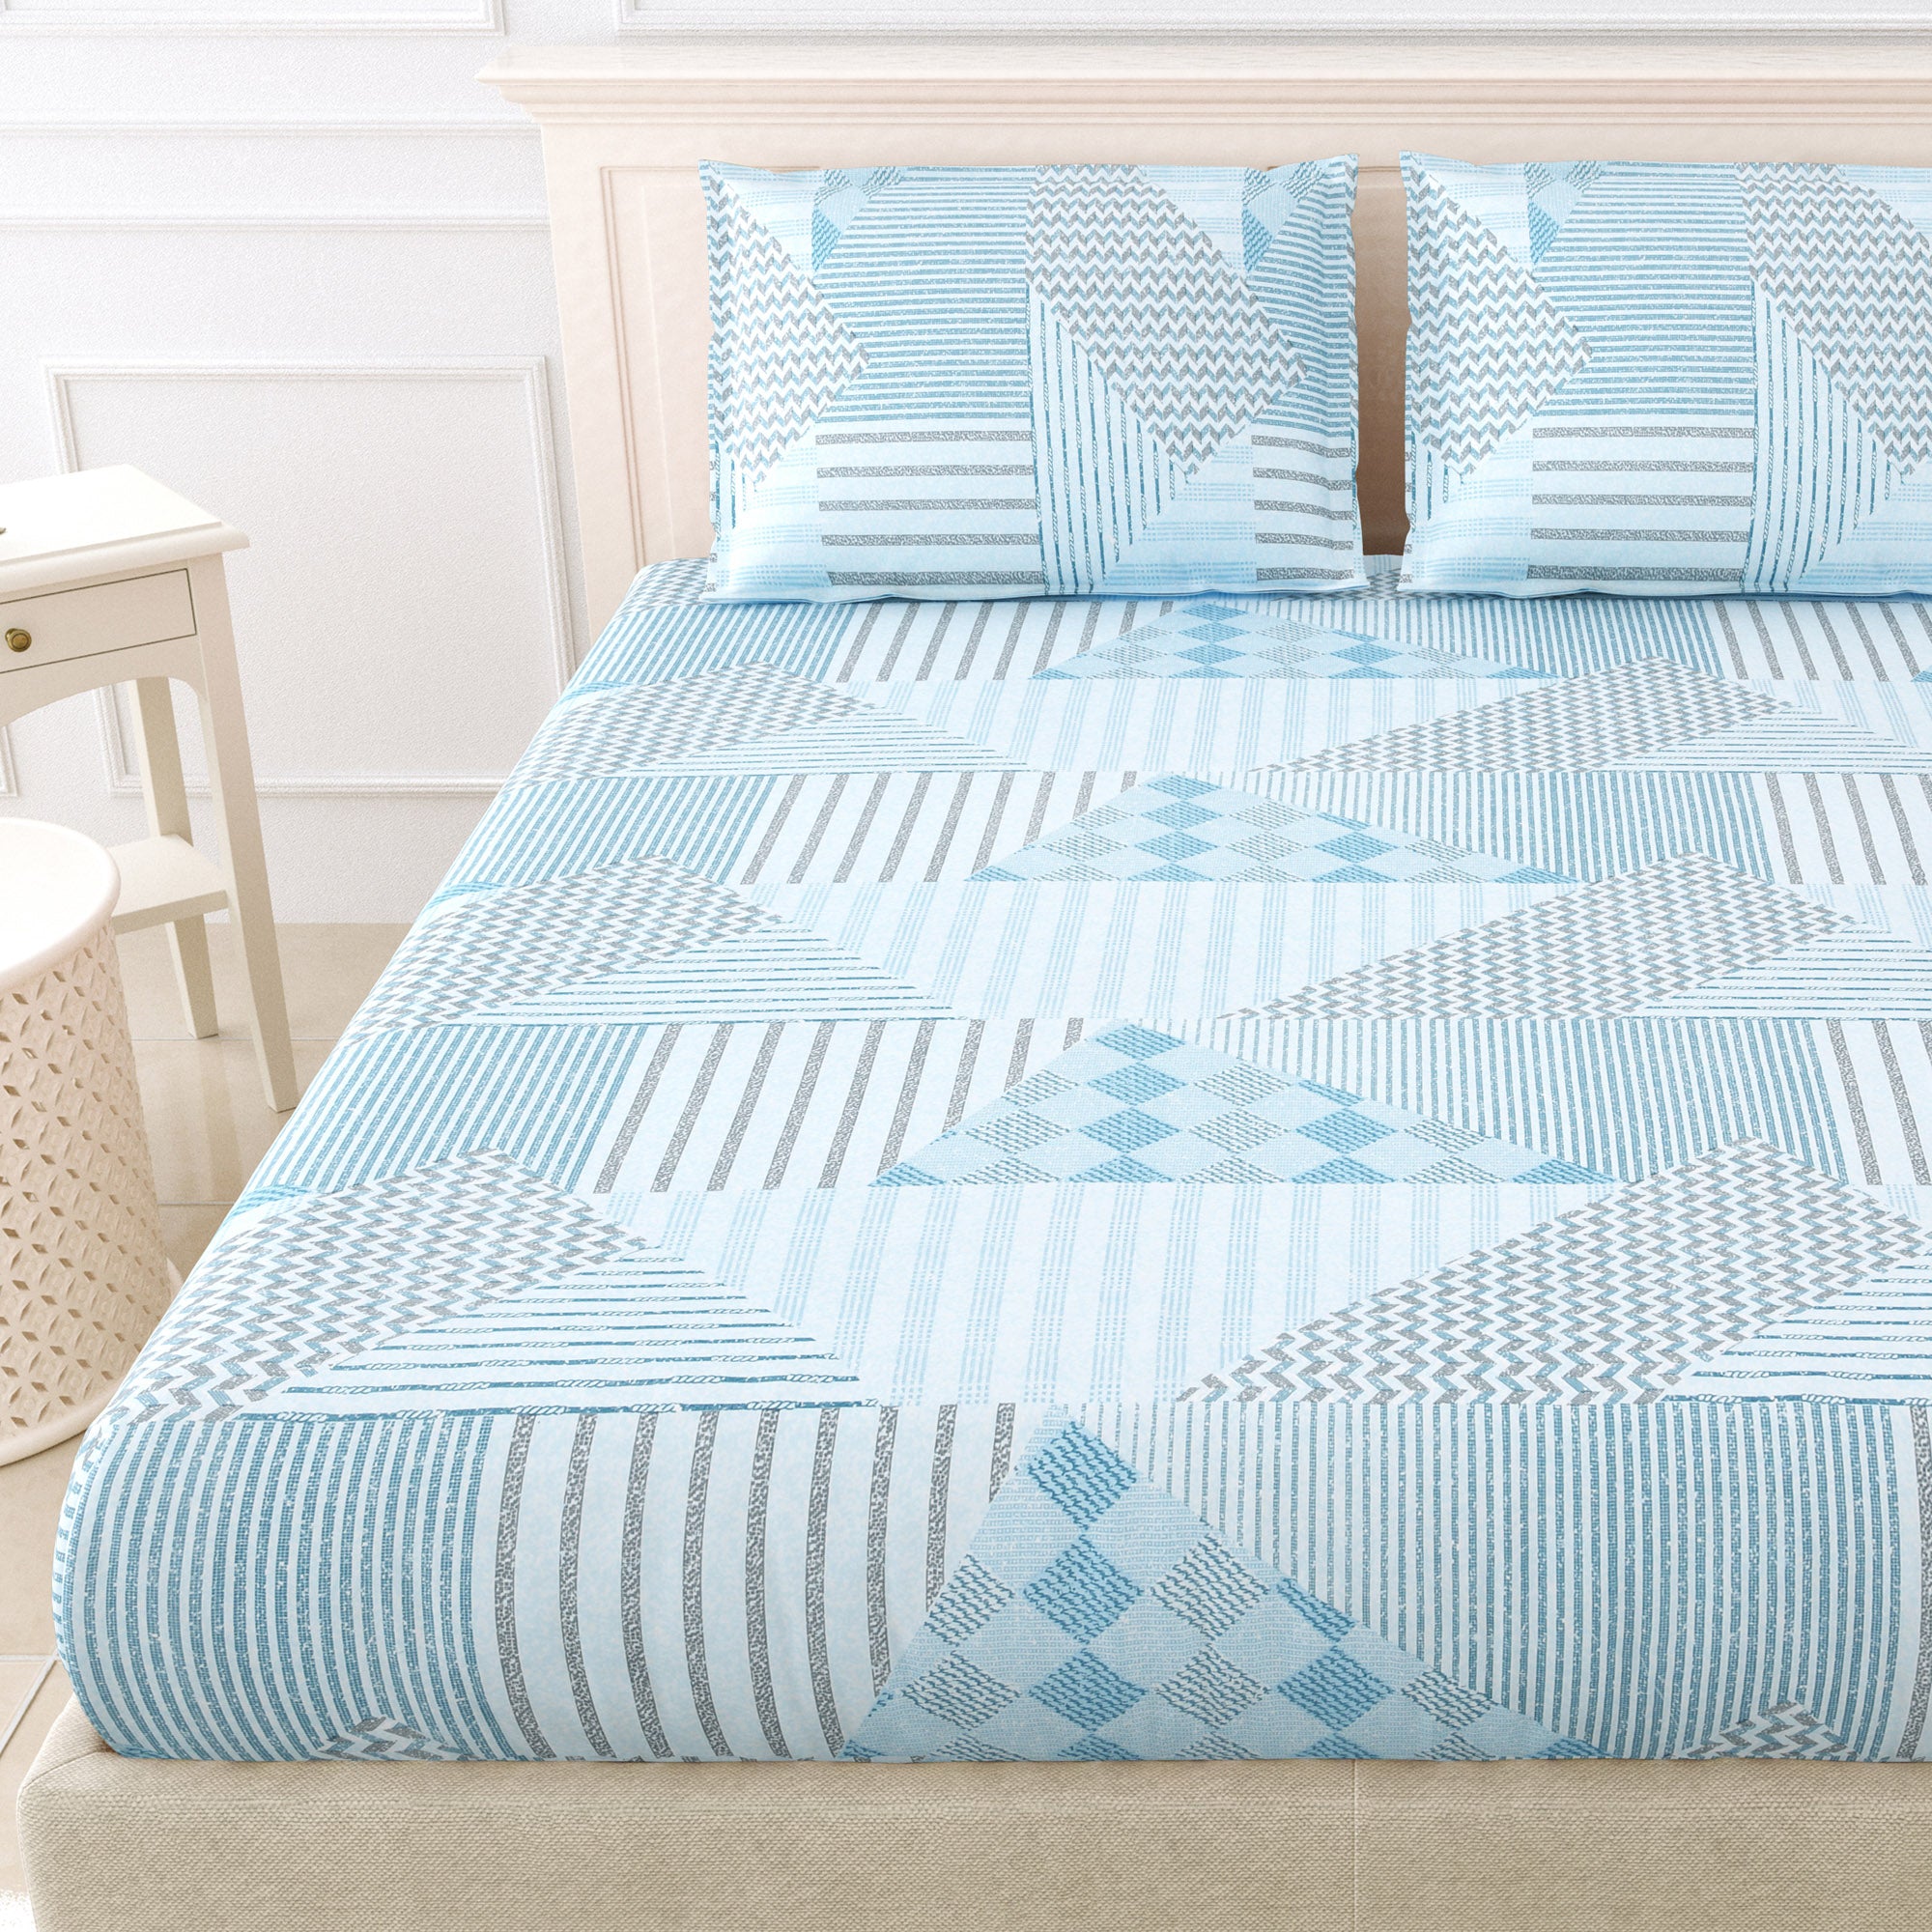 eCraftIndia 250 TC Blue, White Zig Zag Lines Printed Cotton Double Bedsheet With 2 Pillow Covers 2